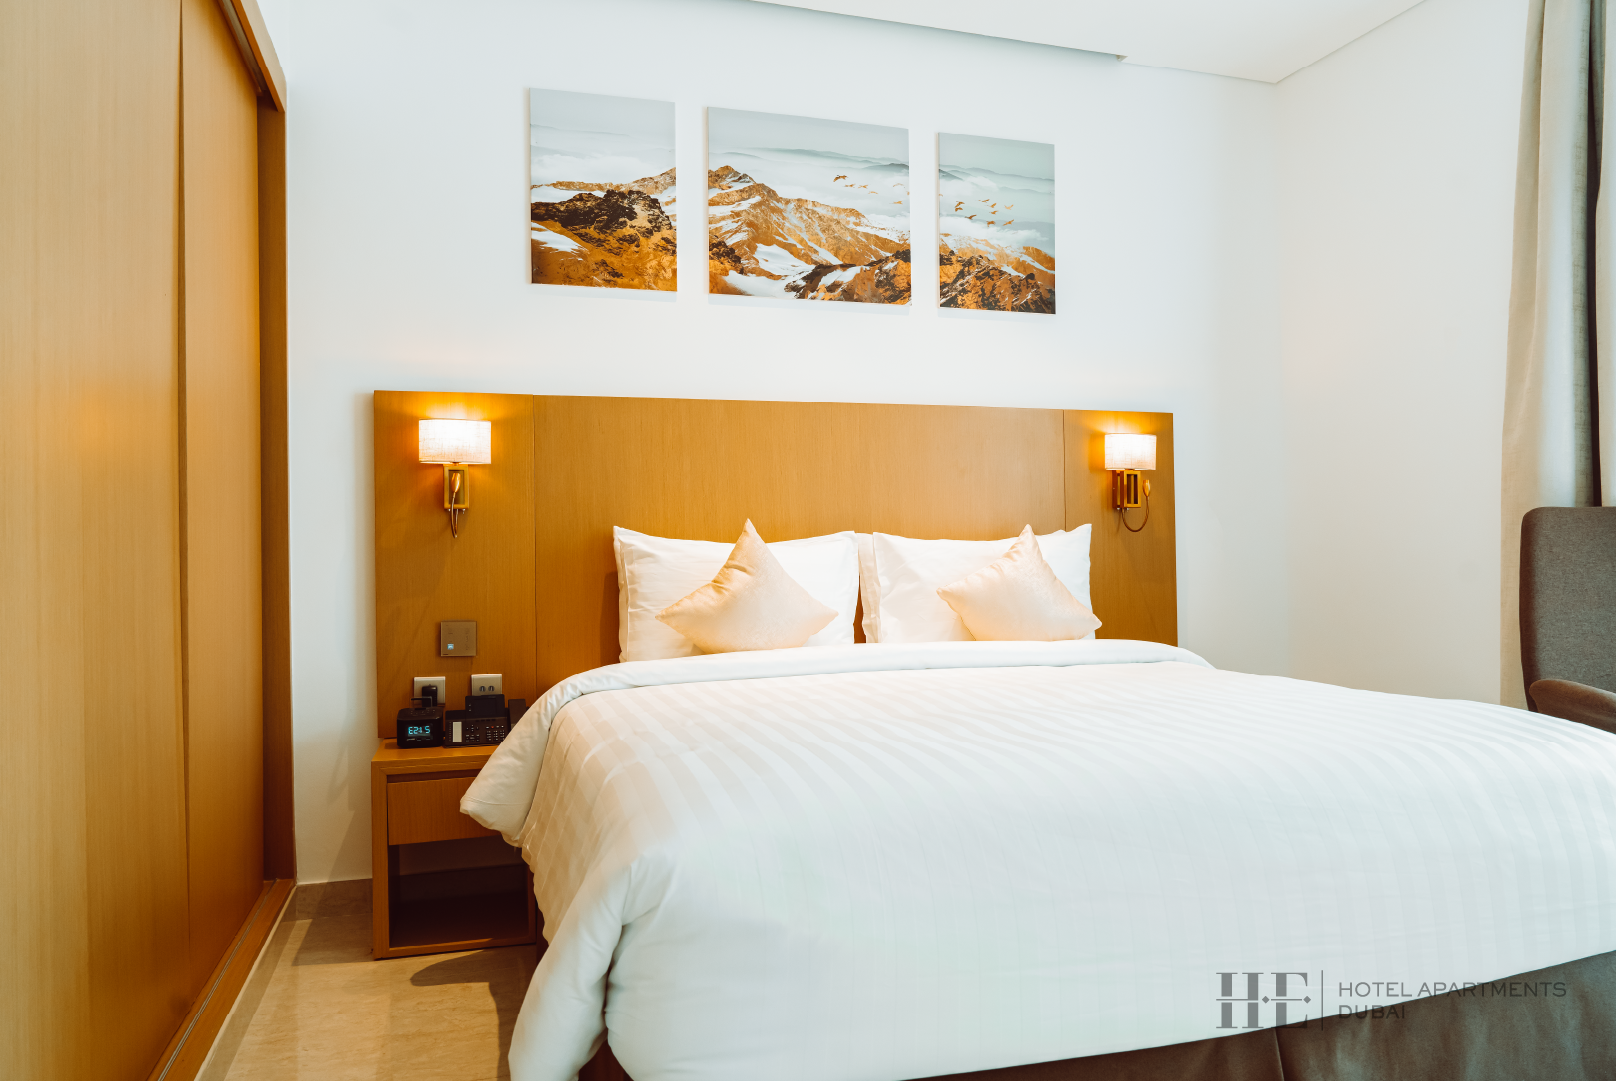 He hotel apartments. He Hotel Apartments by Gewan 5*. He Hotel Apartments by Gewan фото туристов. He Hotel Apartments by Gewan. He Hotel Apartments by Gewan отзывы.